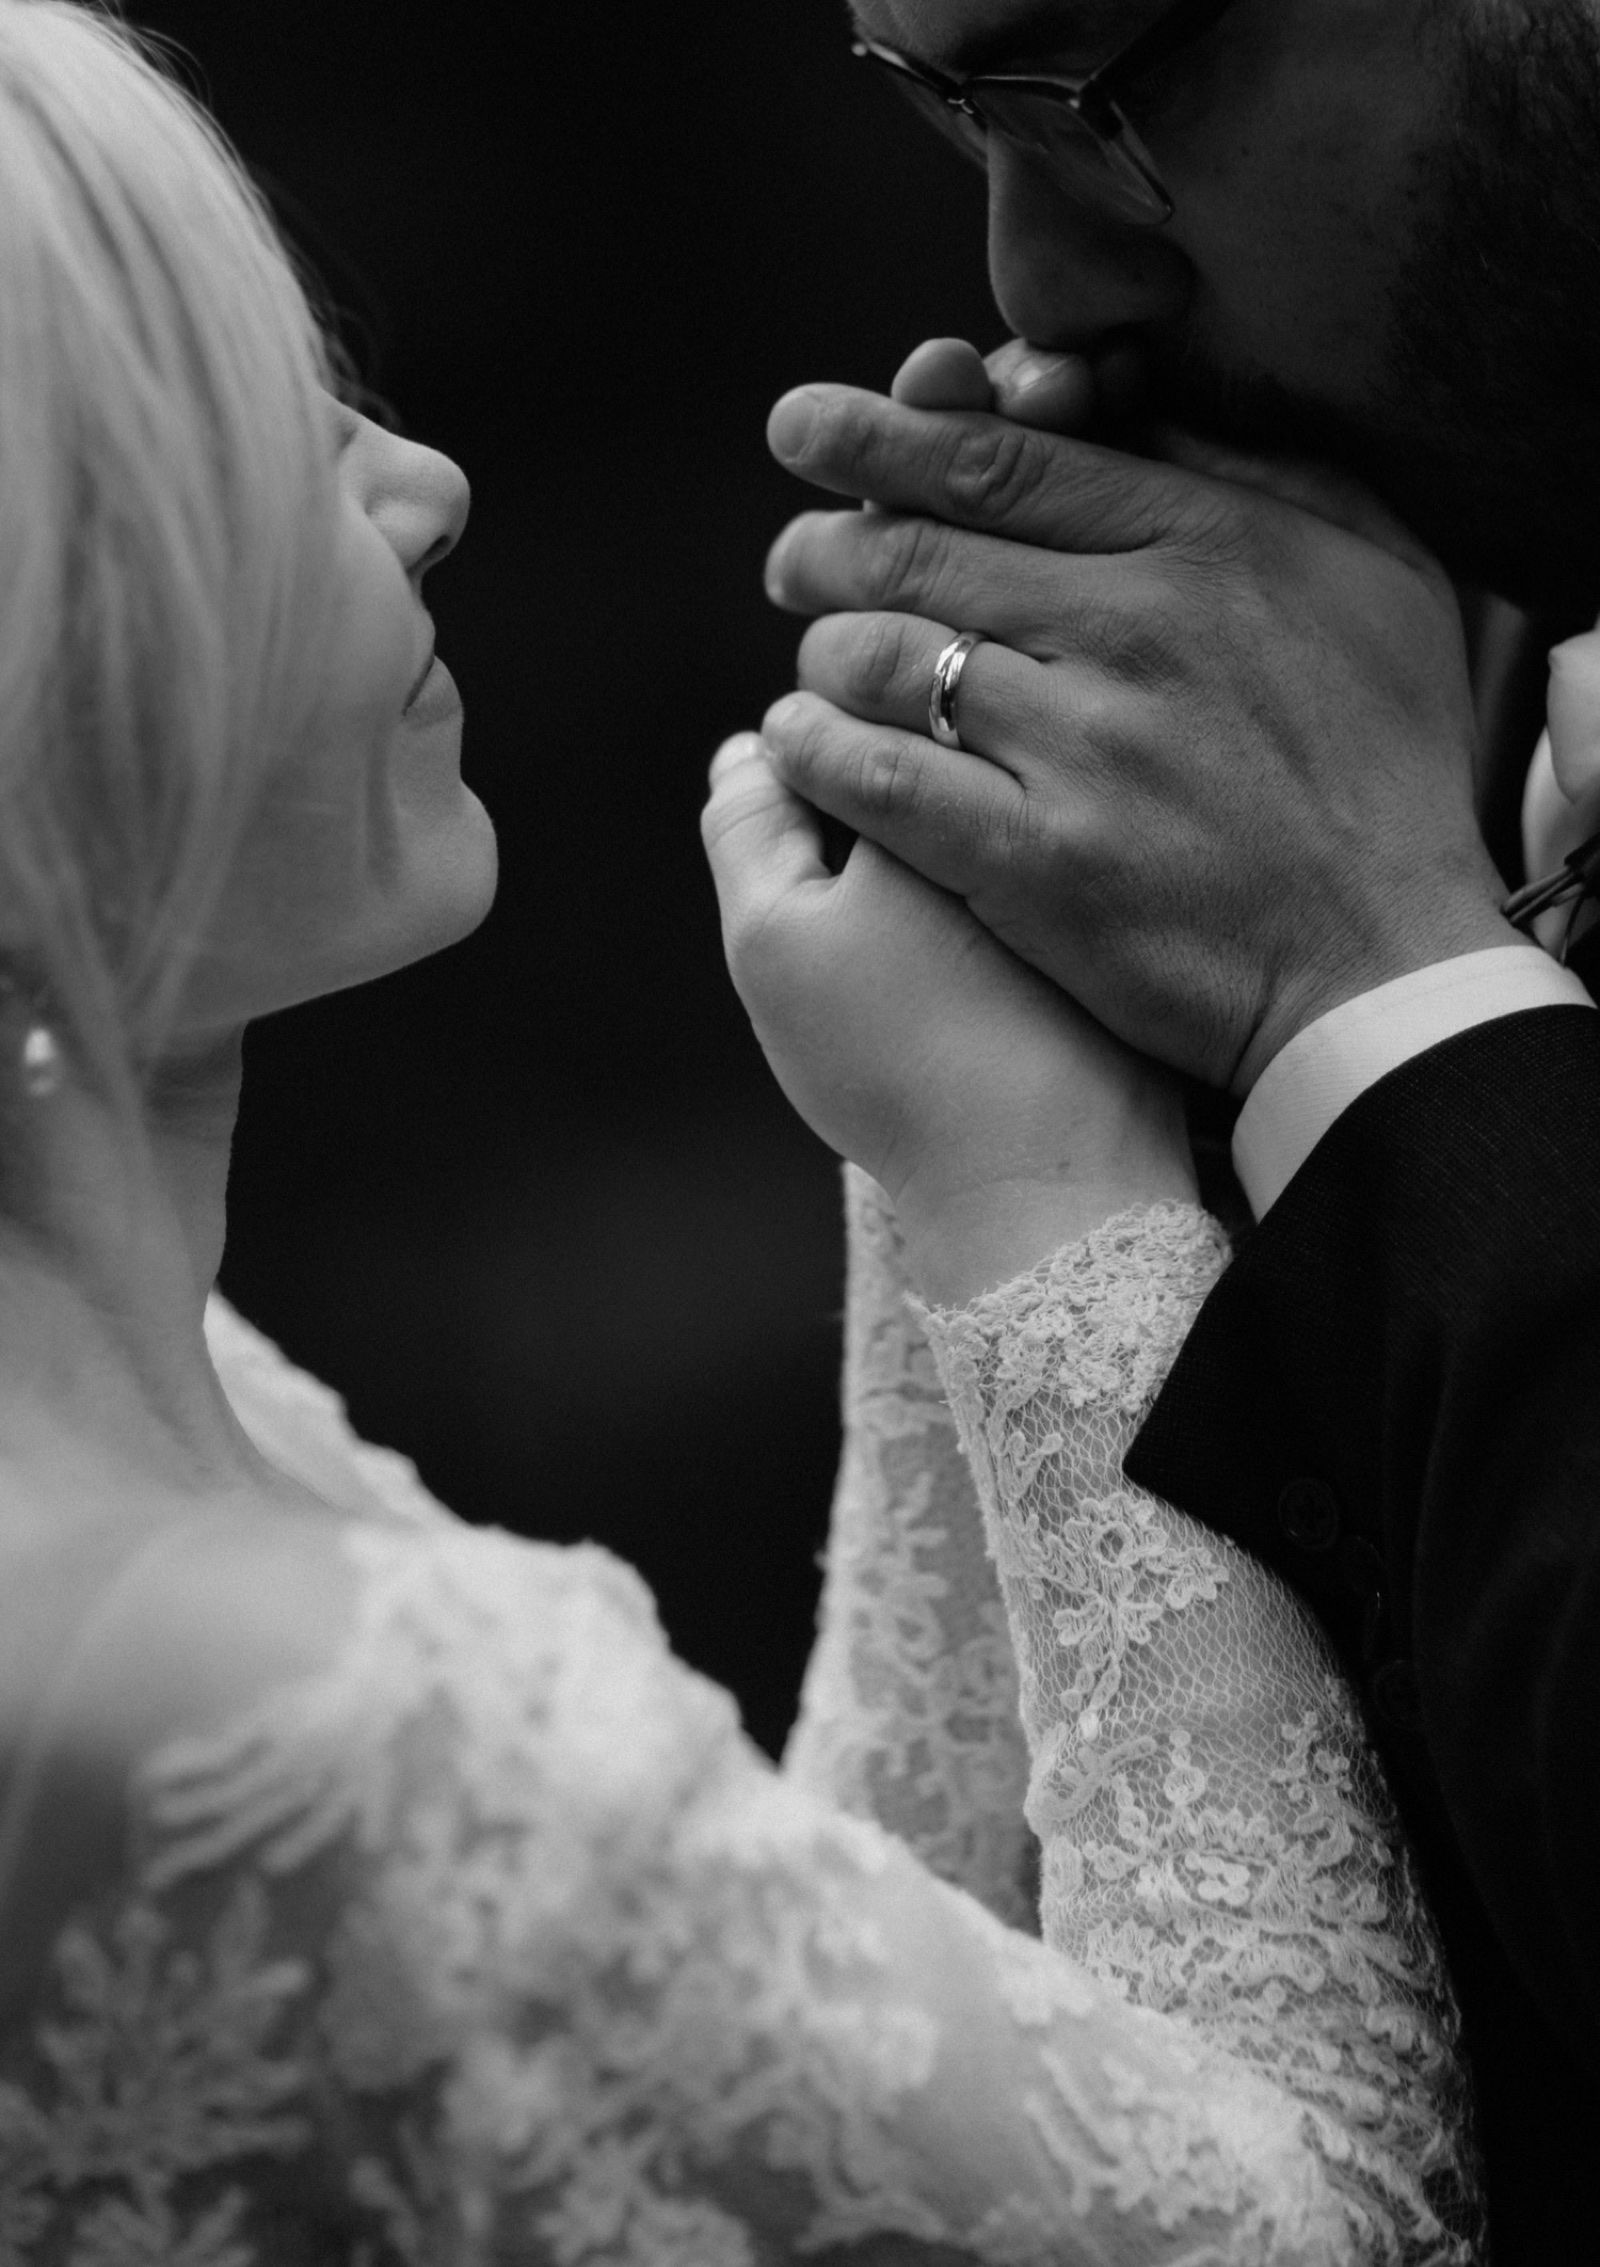 Black and white intimate wedding photography as groom keeps his bride's hands warm by blowing on them